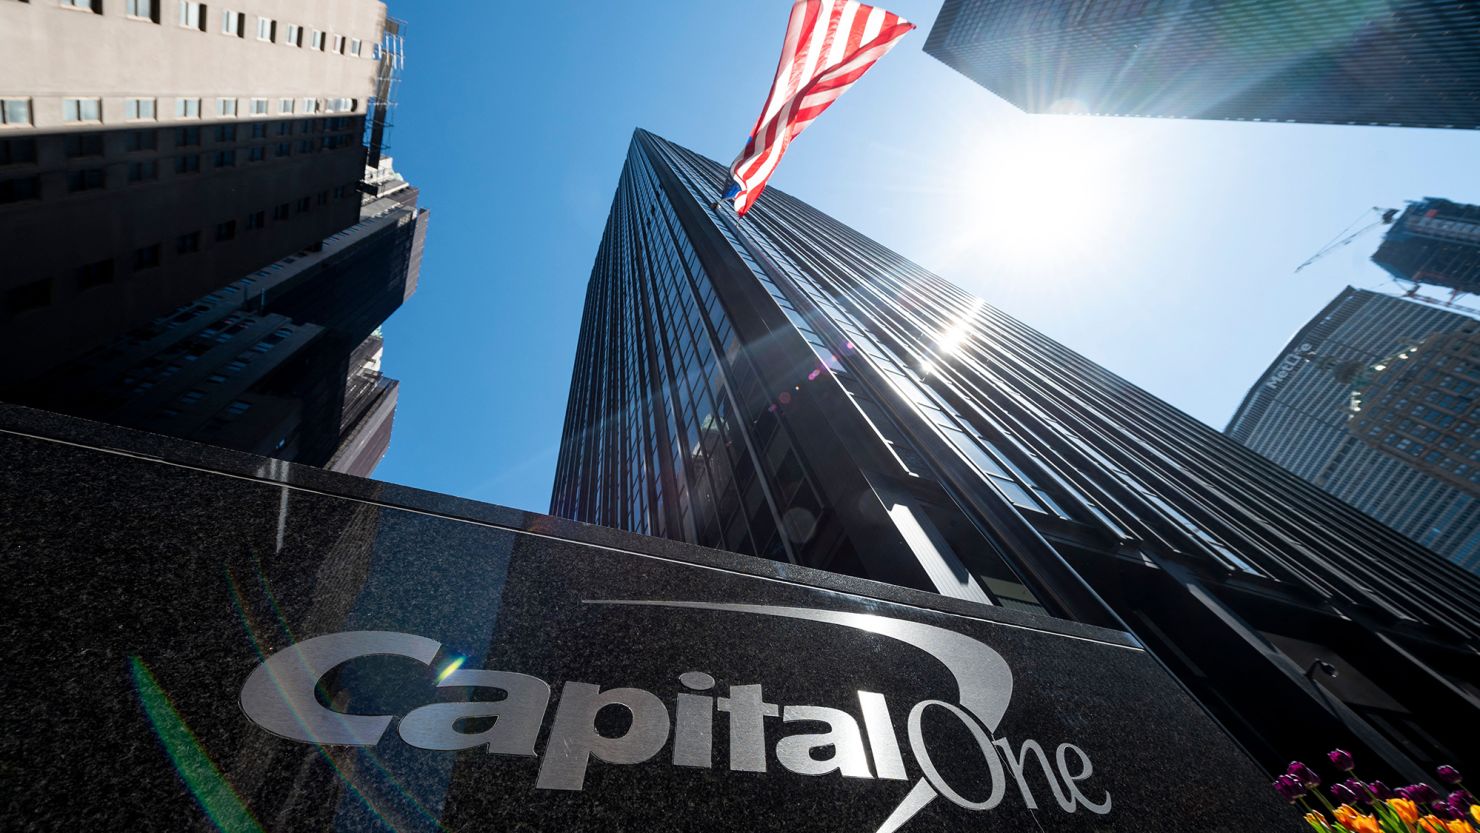 Capital One is acquiring Discover Financial Services, a move that could disrupt the credit card industry.